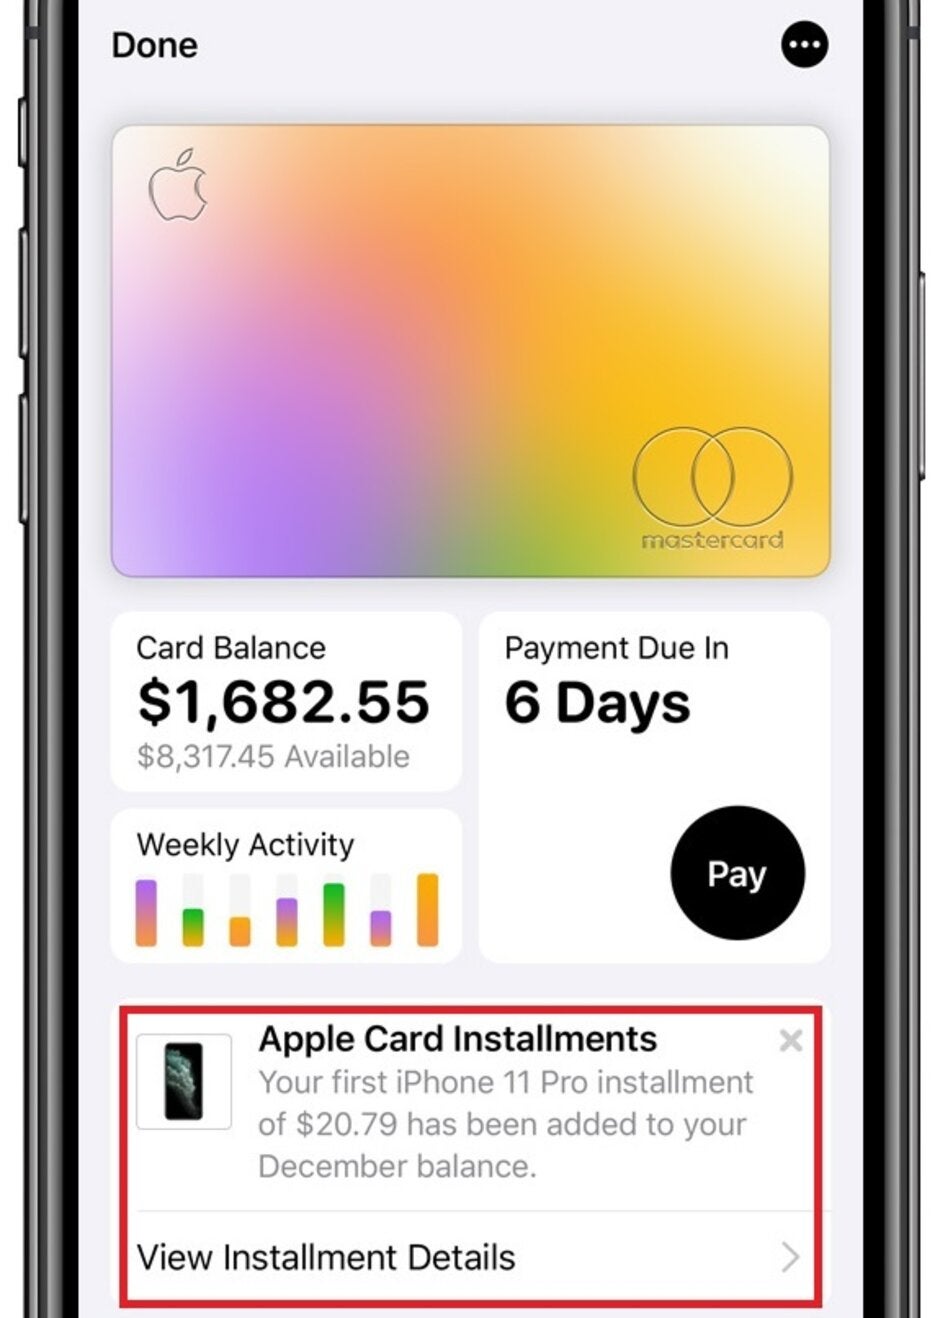 Use the Apple Card at the Apple Store and pay off your new iPhone by making 24 interest-free payments - Apple Card holders can buy an iPhone and make 24 monthly interest-free payments